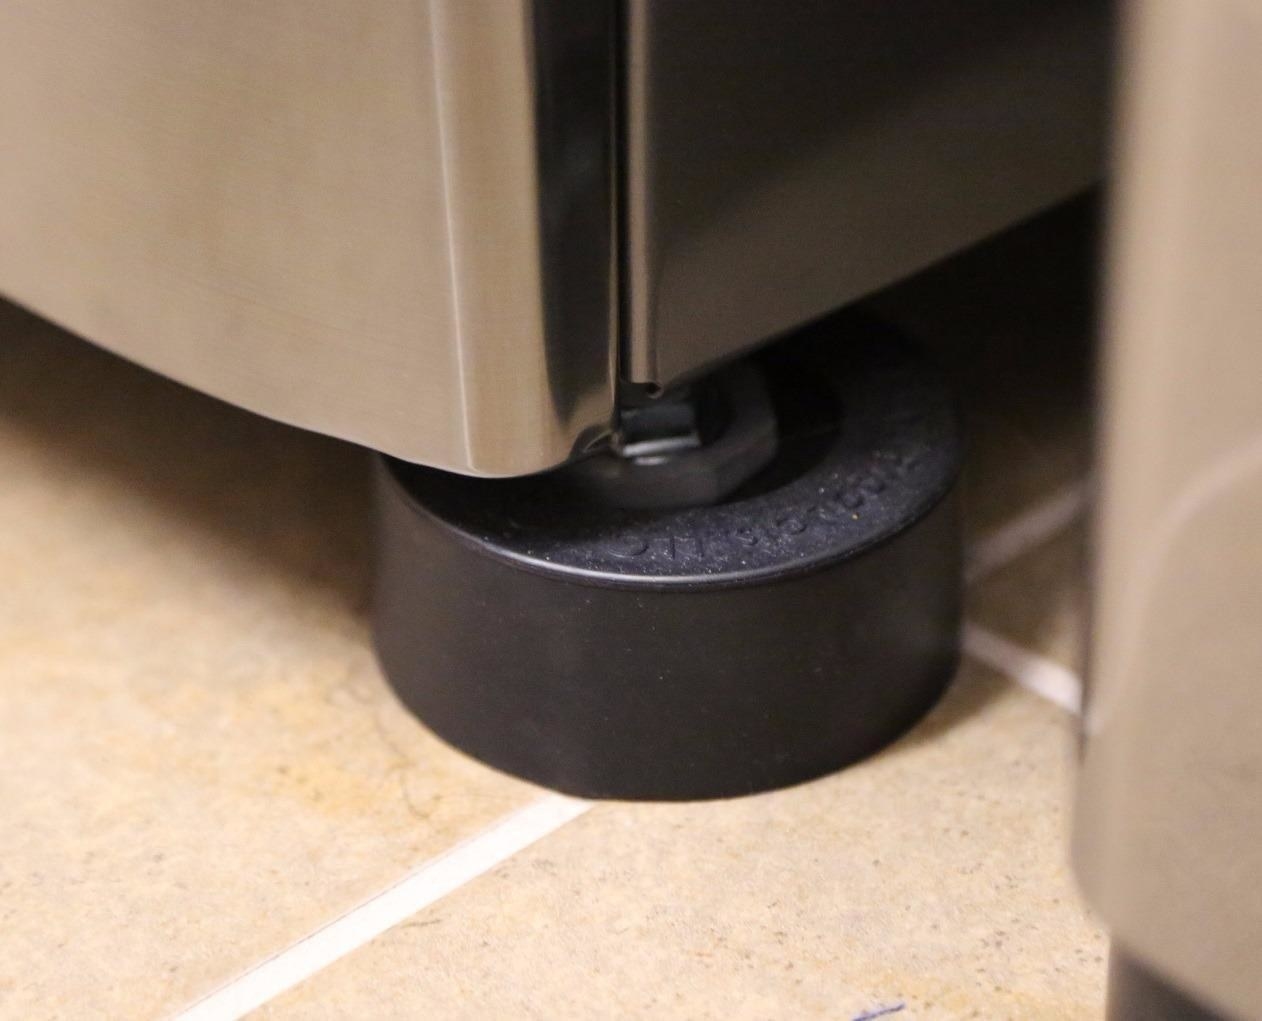 reviewer pic of black rubber hockey puck-like pad underneath the corner of a washing machine on a tile floor